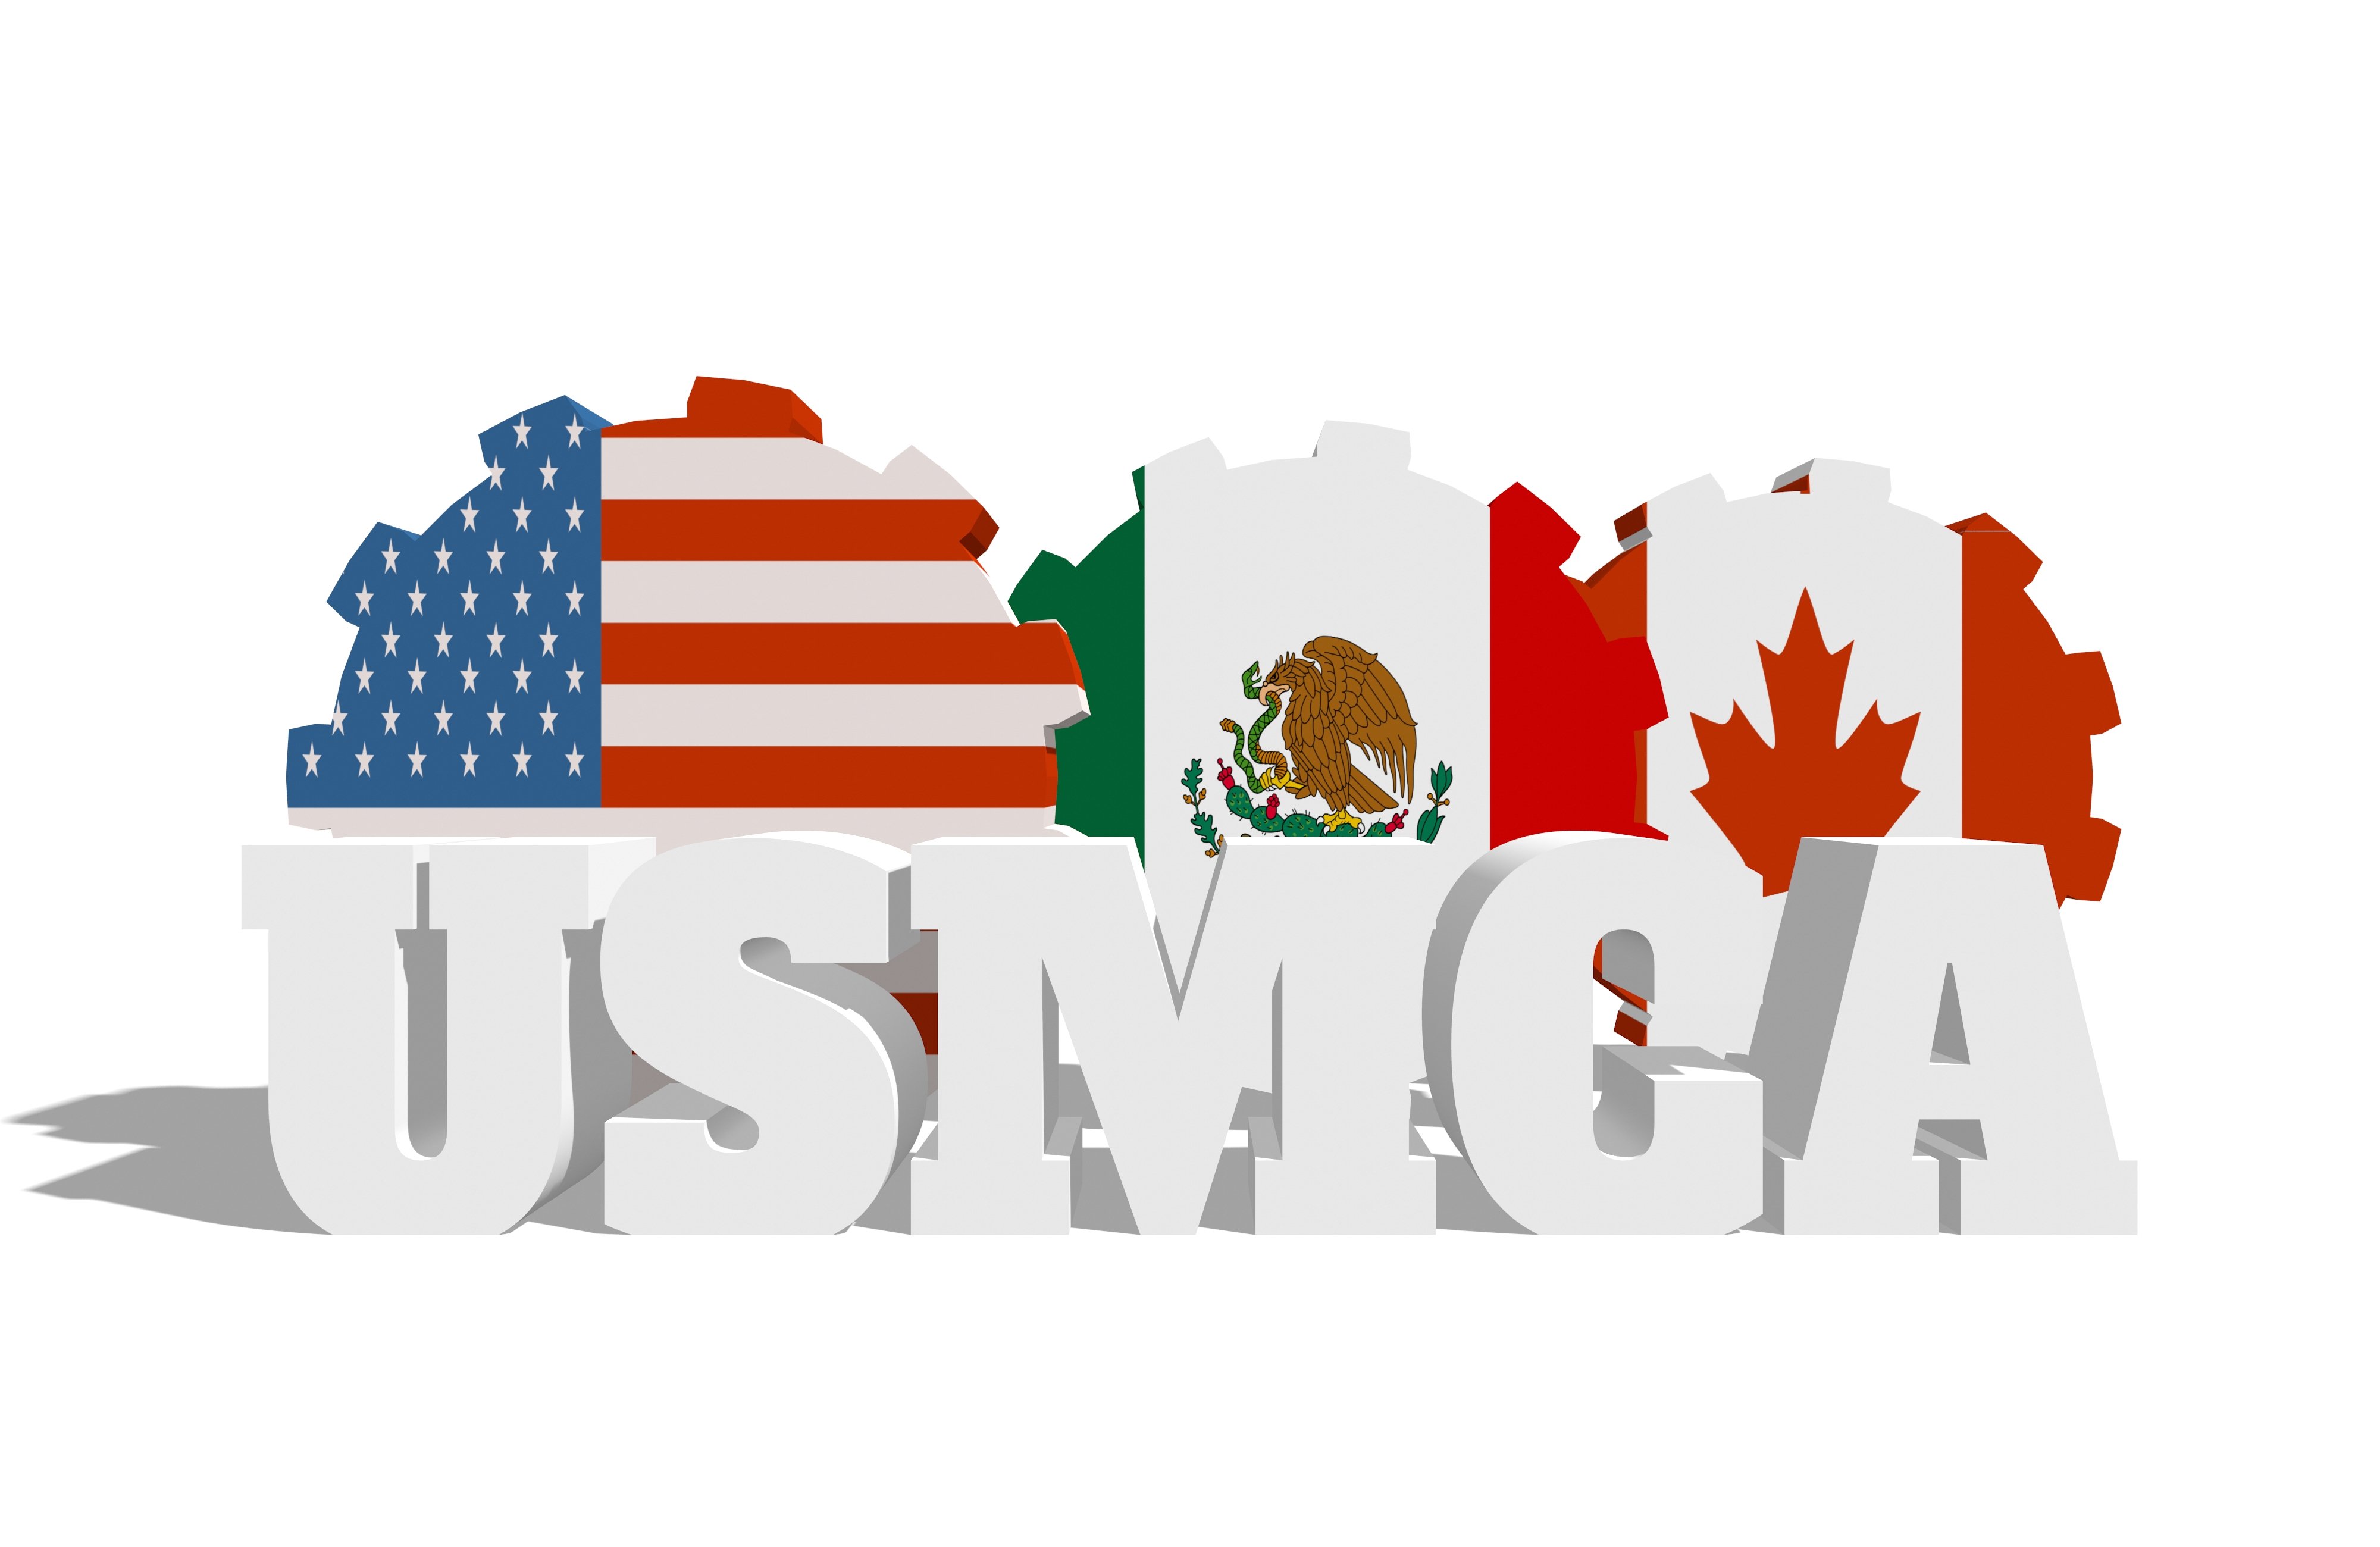 USMCA Is Now Ratified What’s next for NAFTA 2.0?